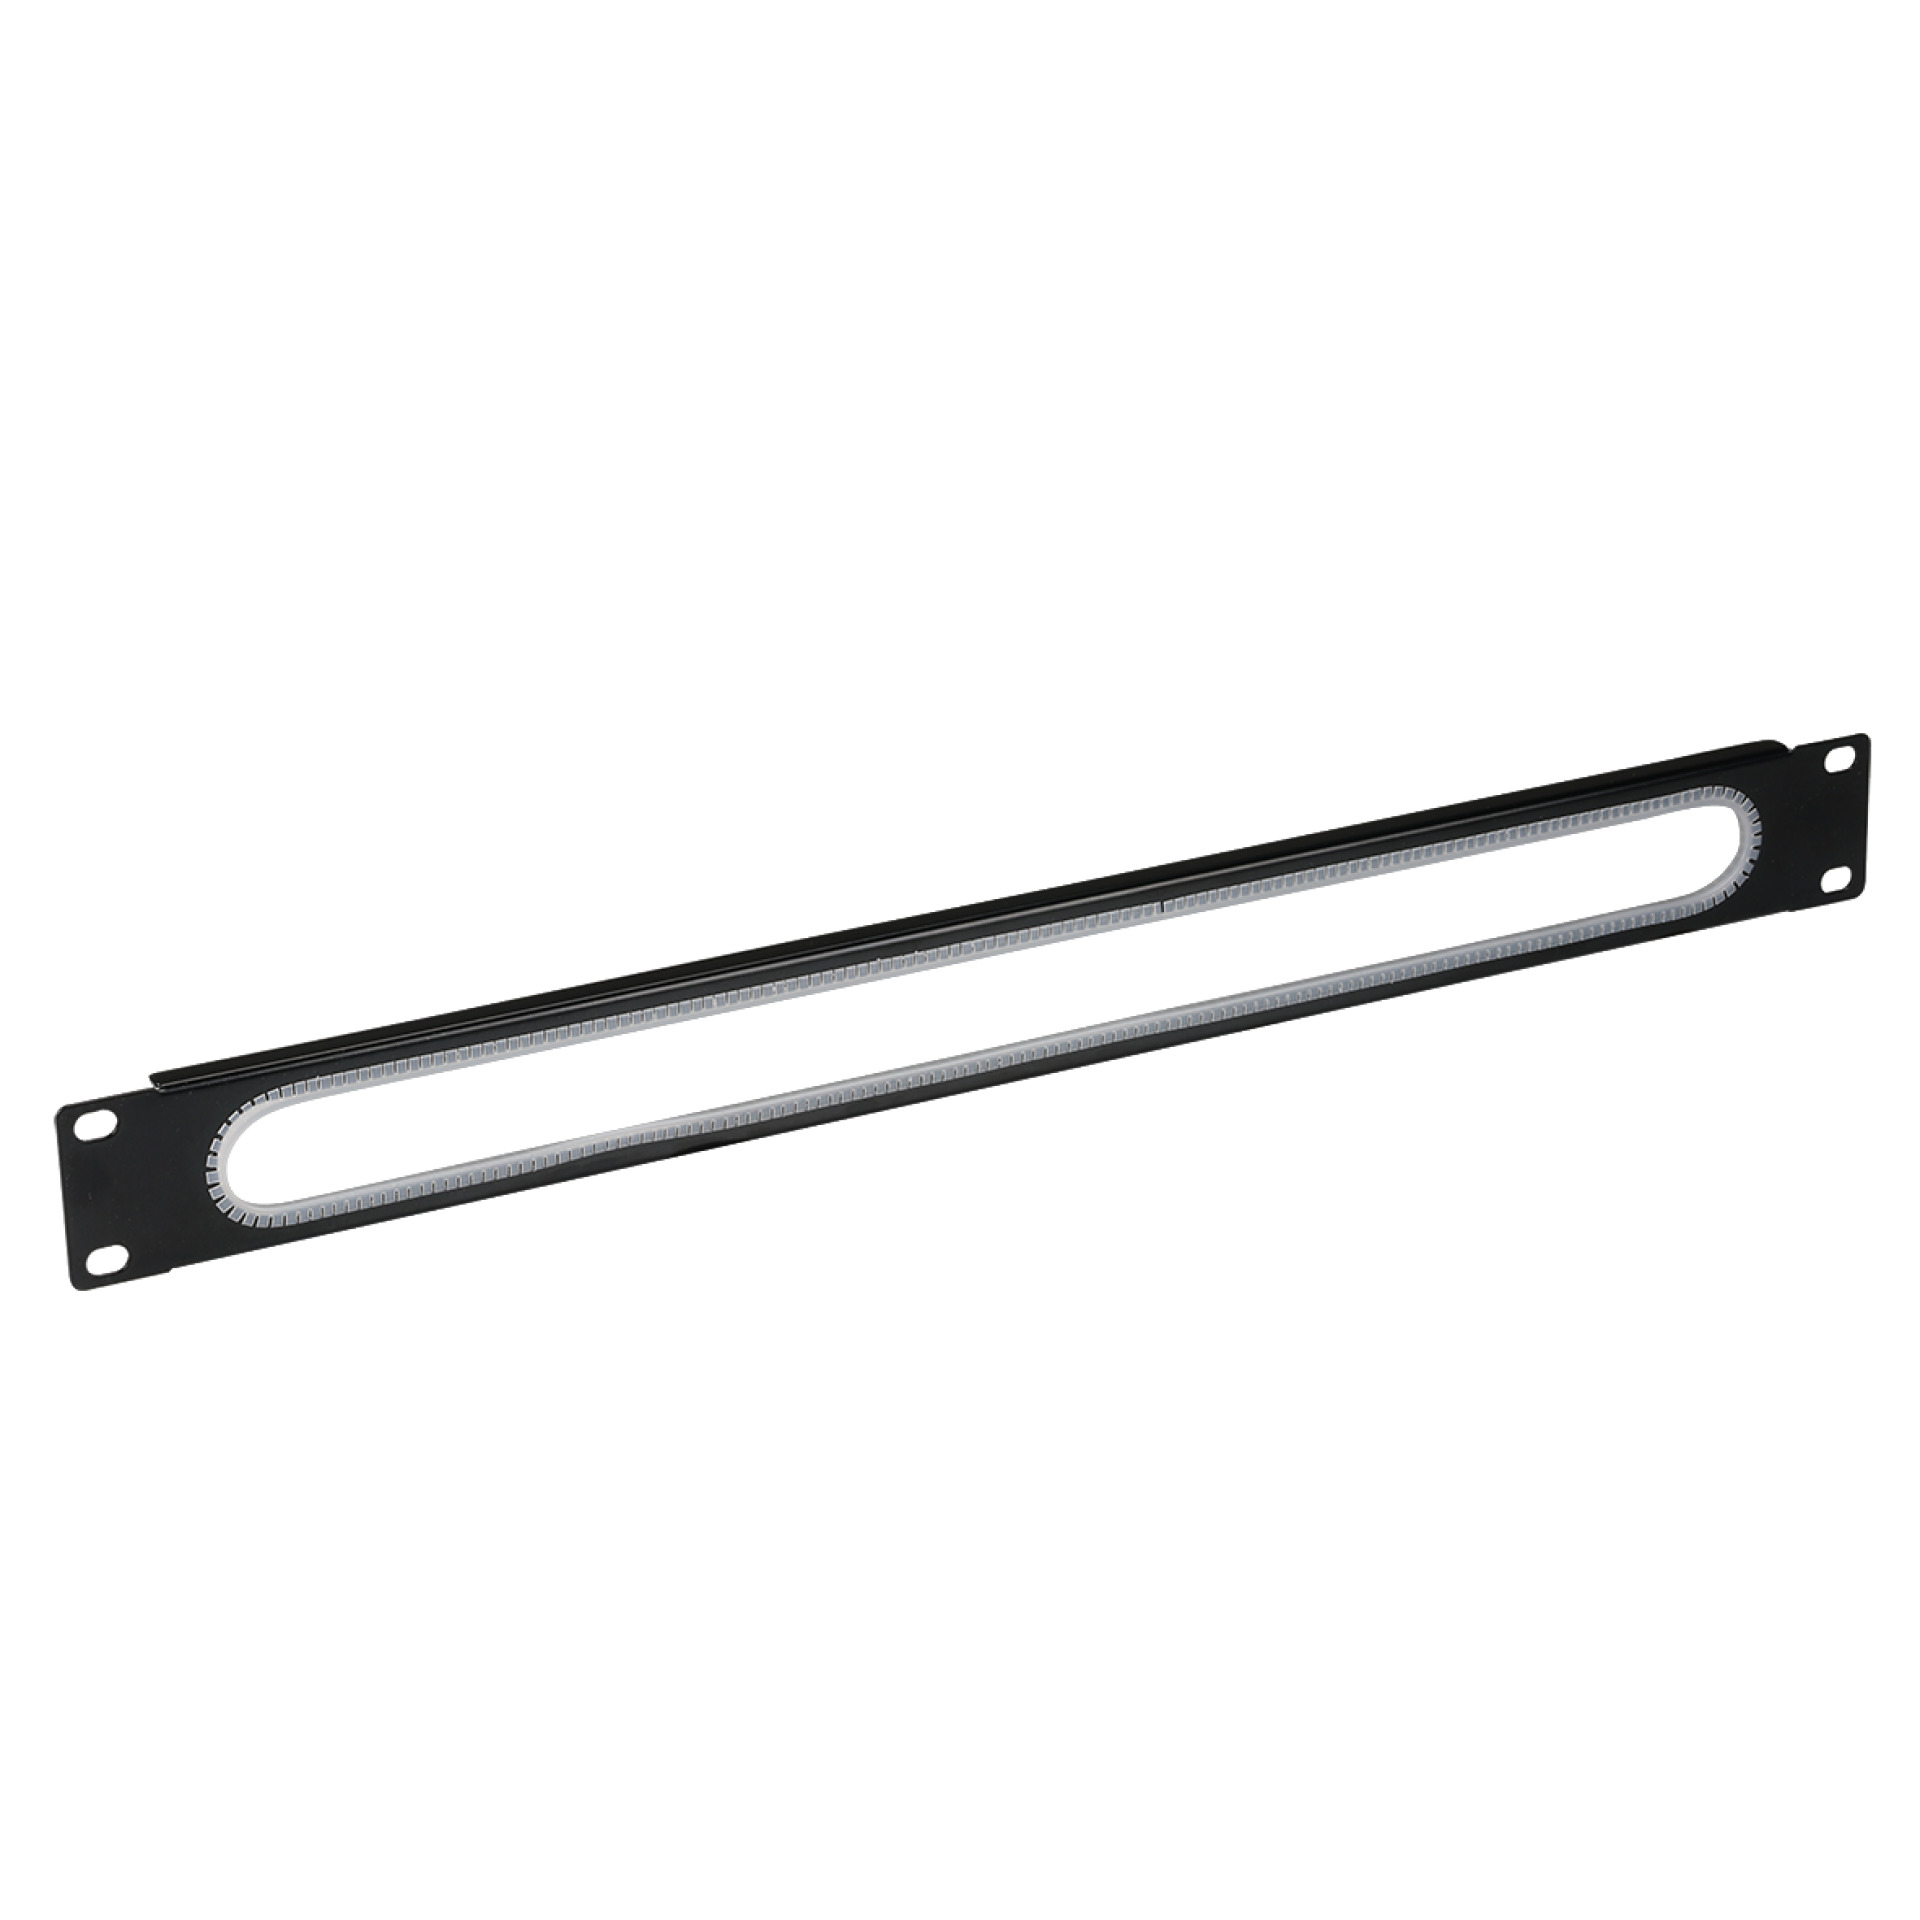 19" 1U Cable Feedtrough Panel, Edge Protection, Steel RAL9005